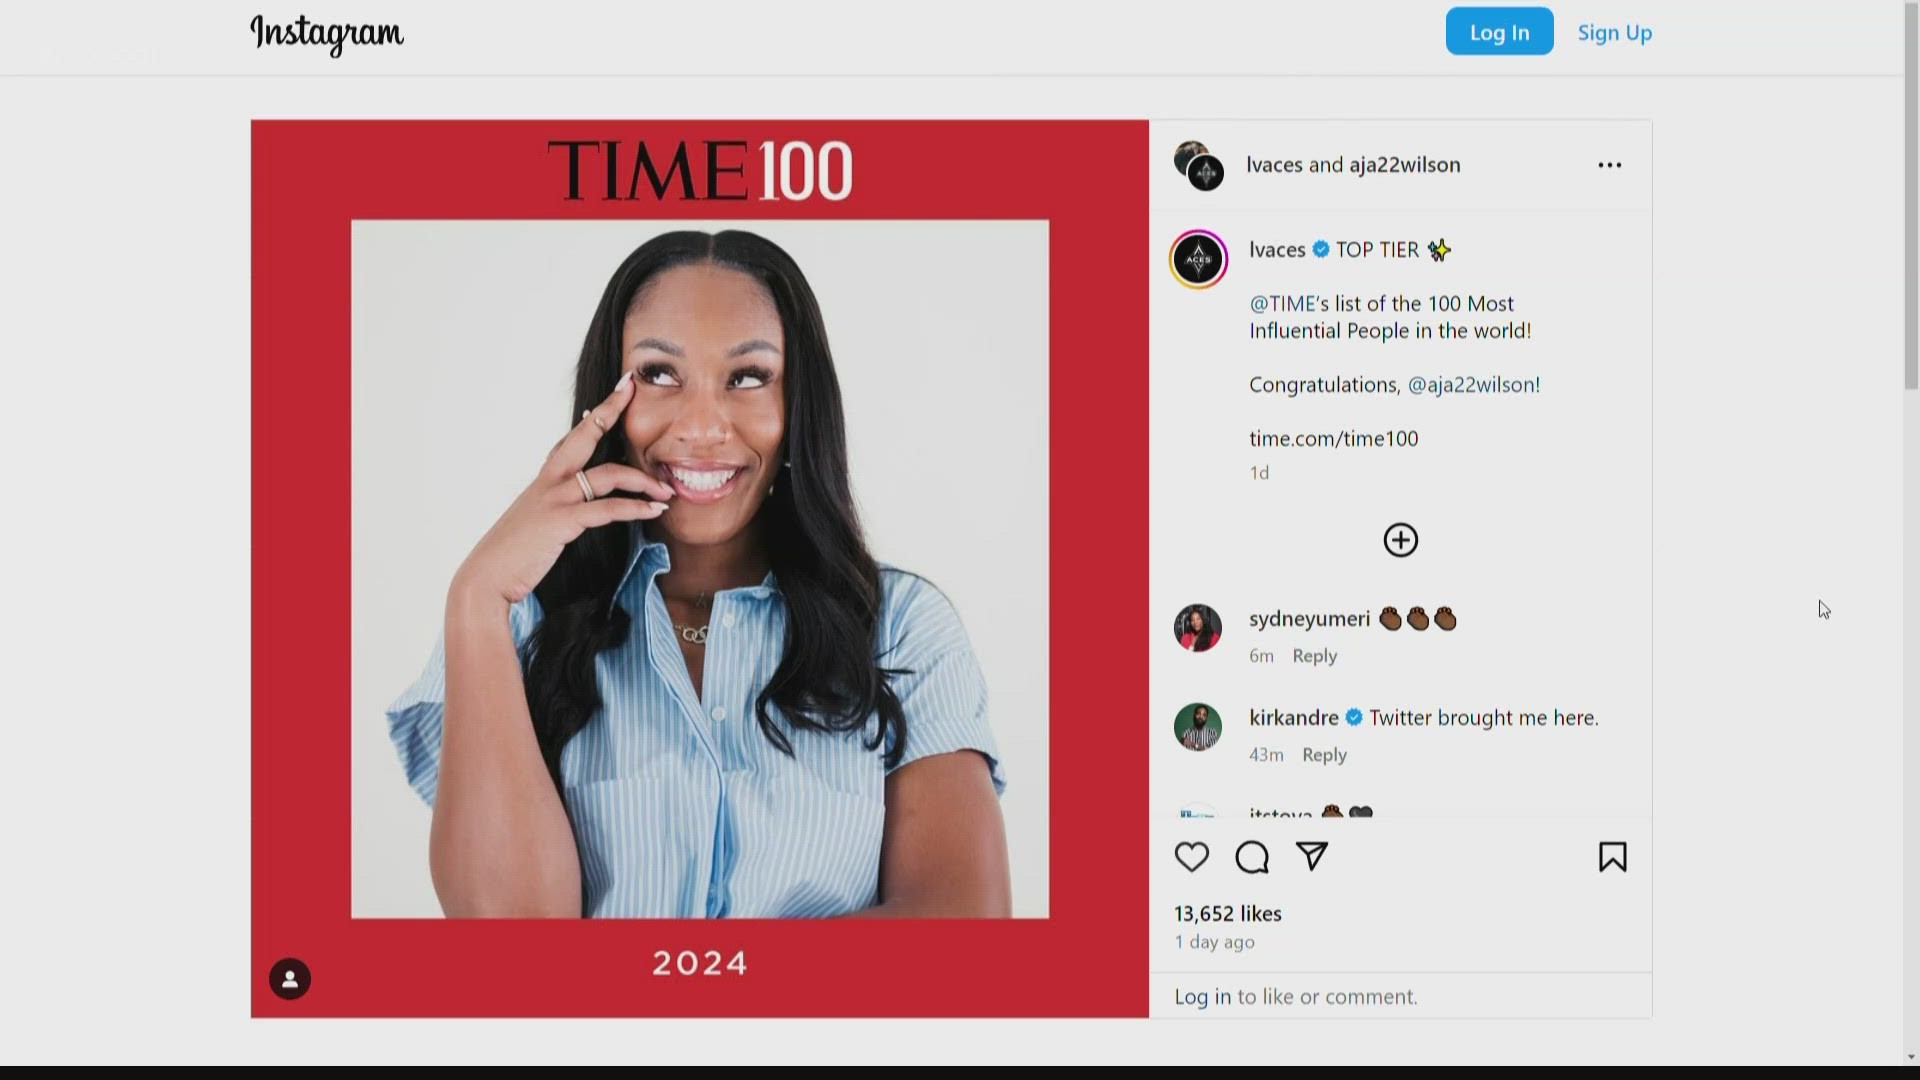 Midlands native, former USC basketball star and current Las Vegas Aces forward A'ja Wilson has been named one of Time's 100 most influential people.